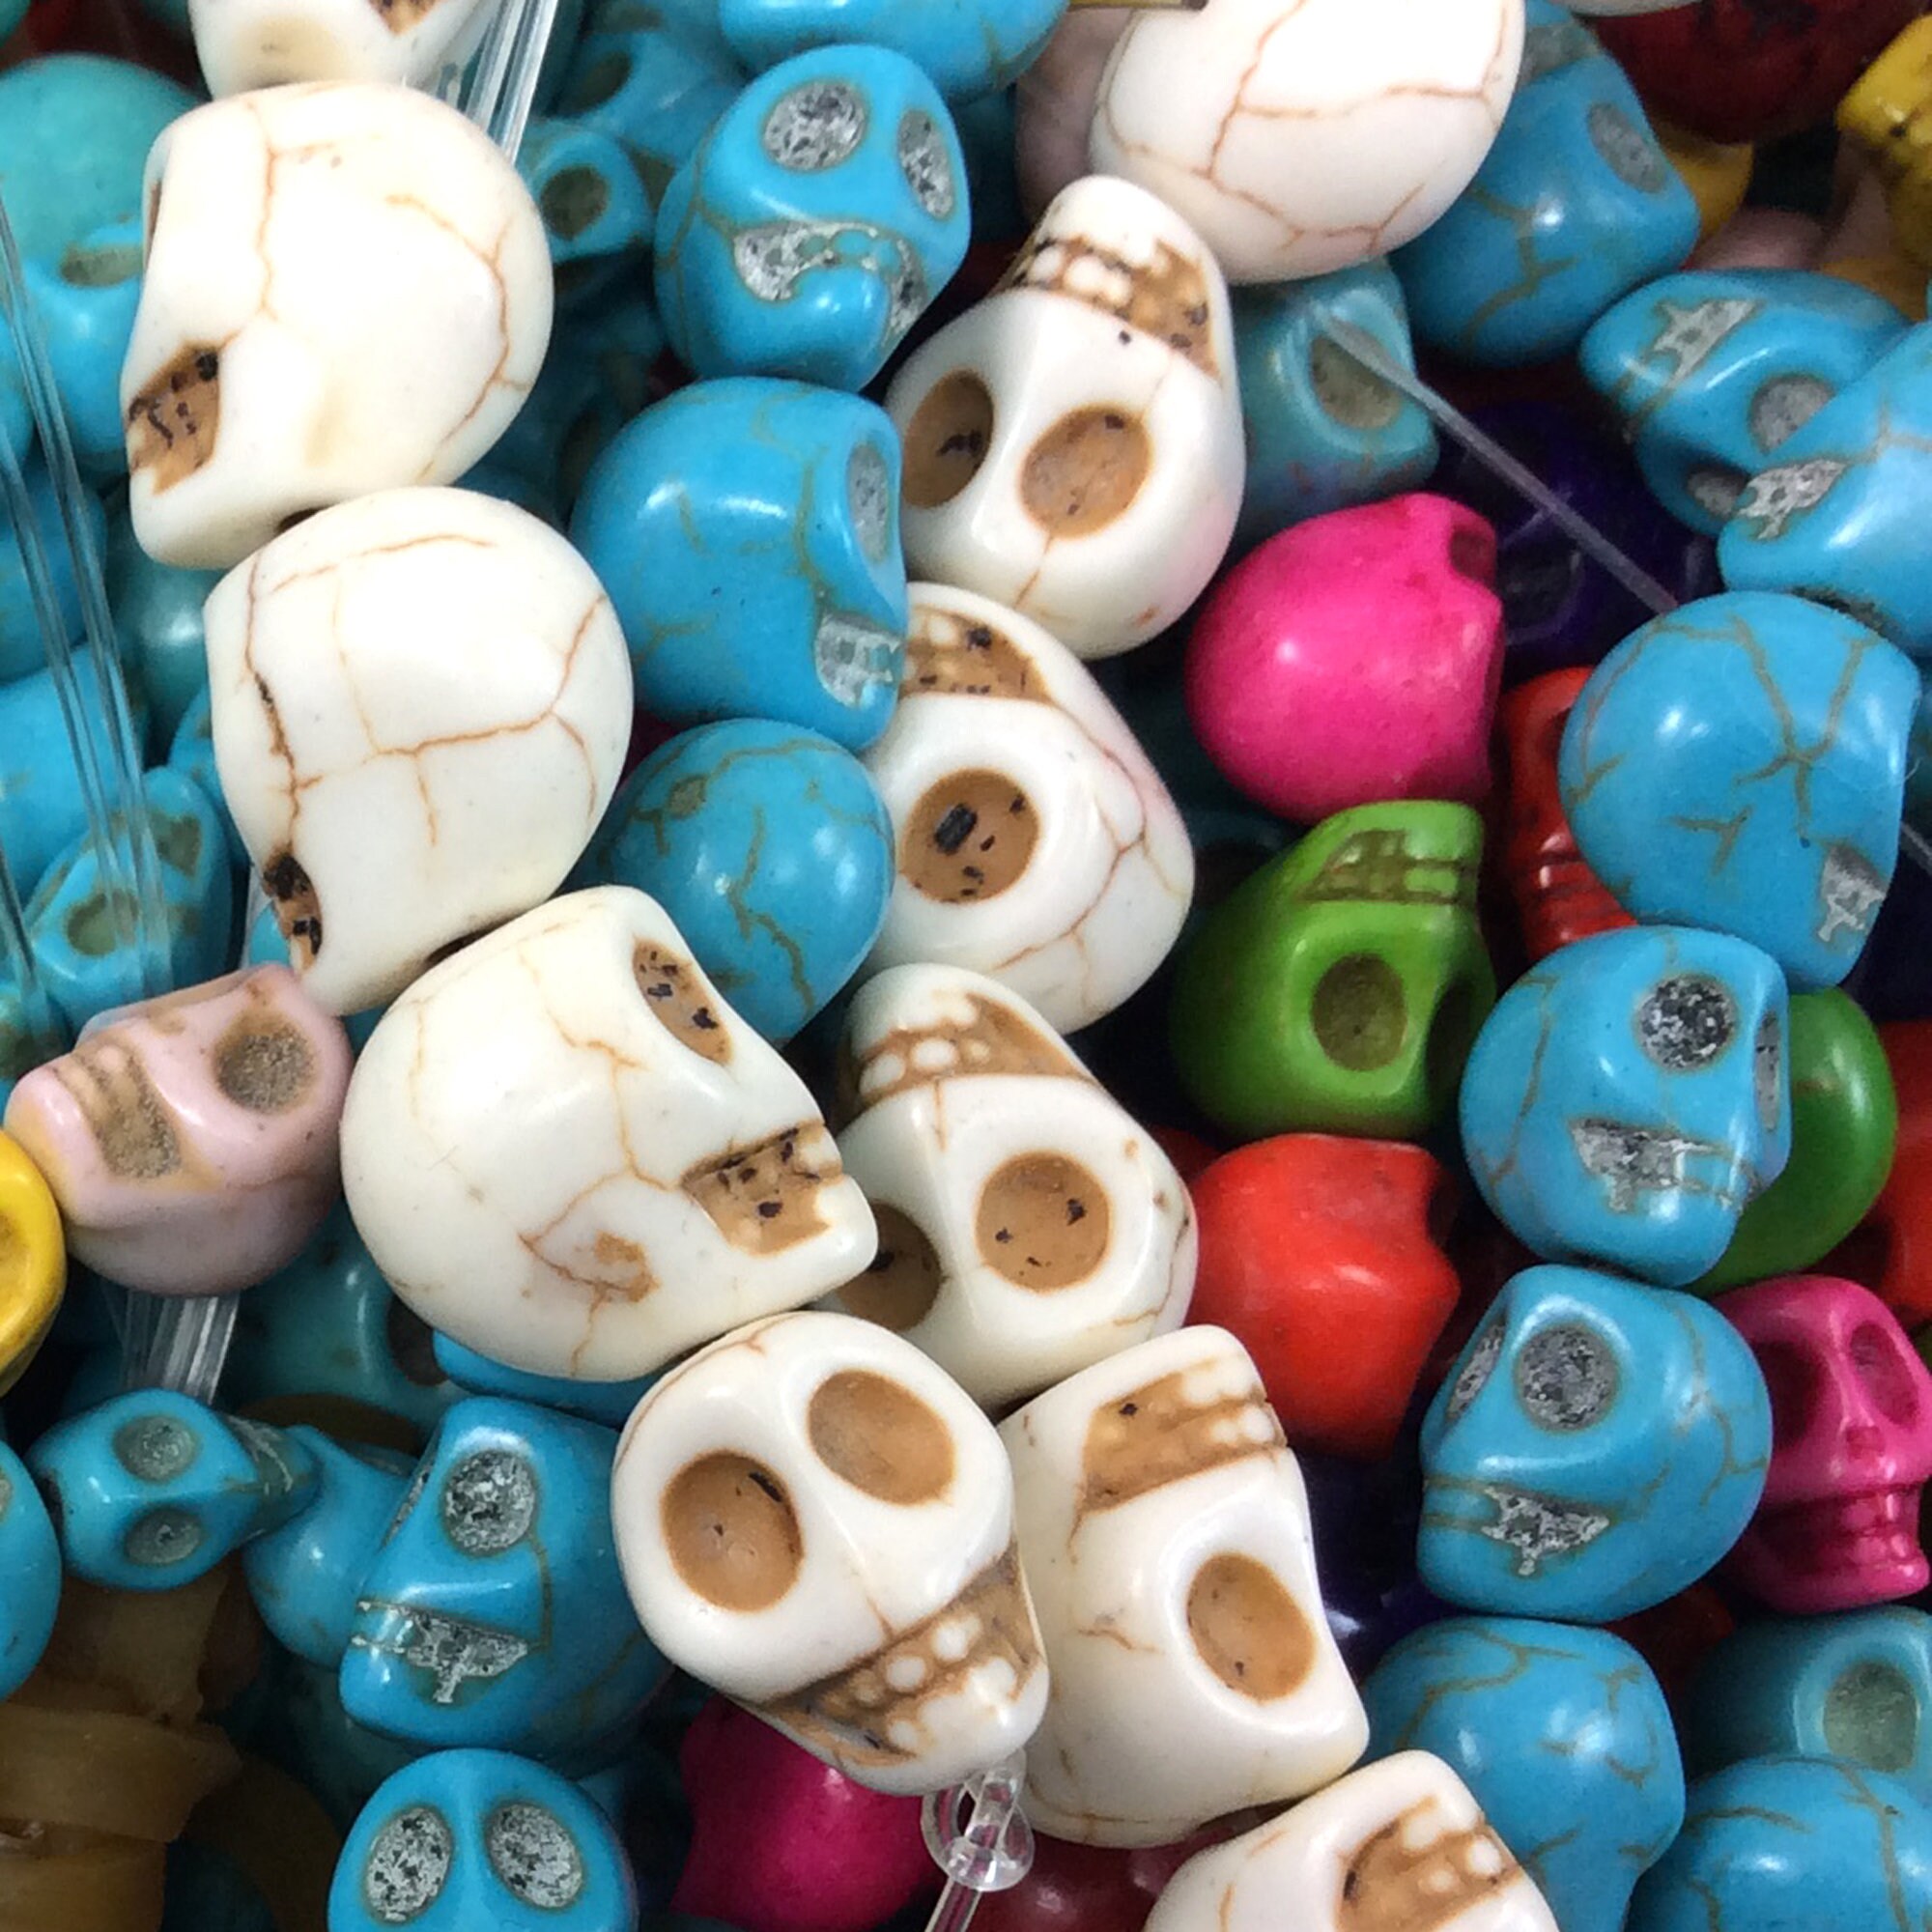 10mm Skull Beads in Turquoise Color Faux Howlite, Fun Lightweight